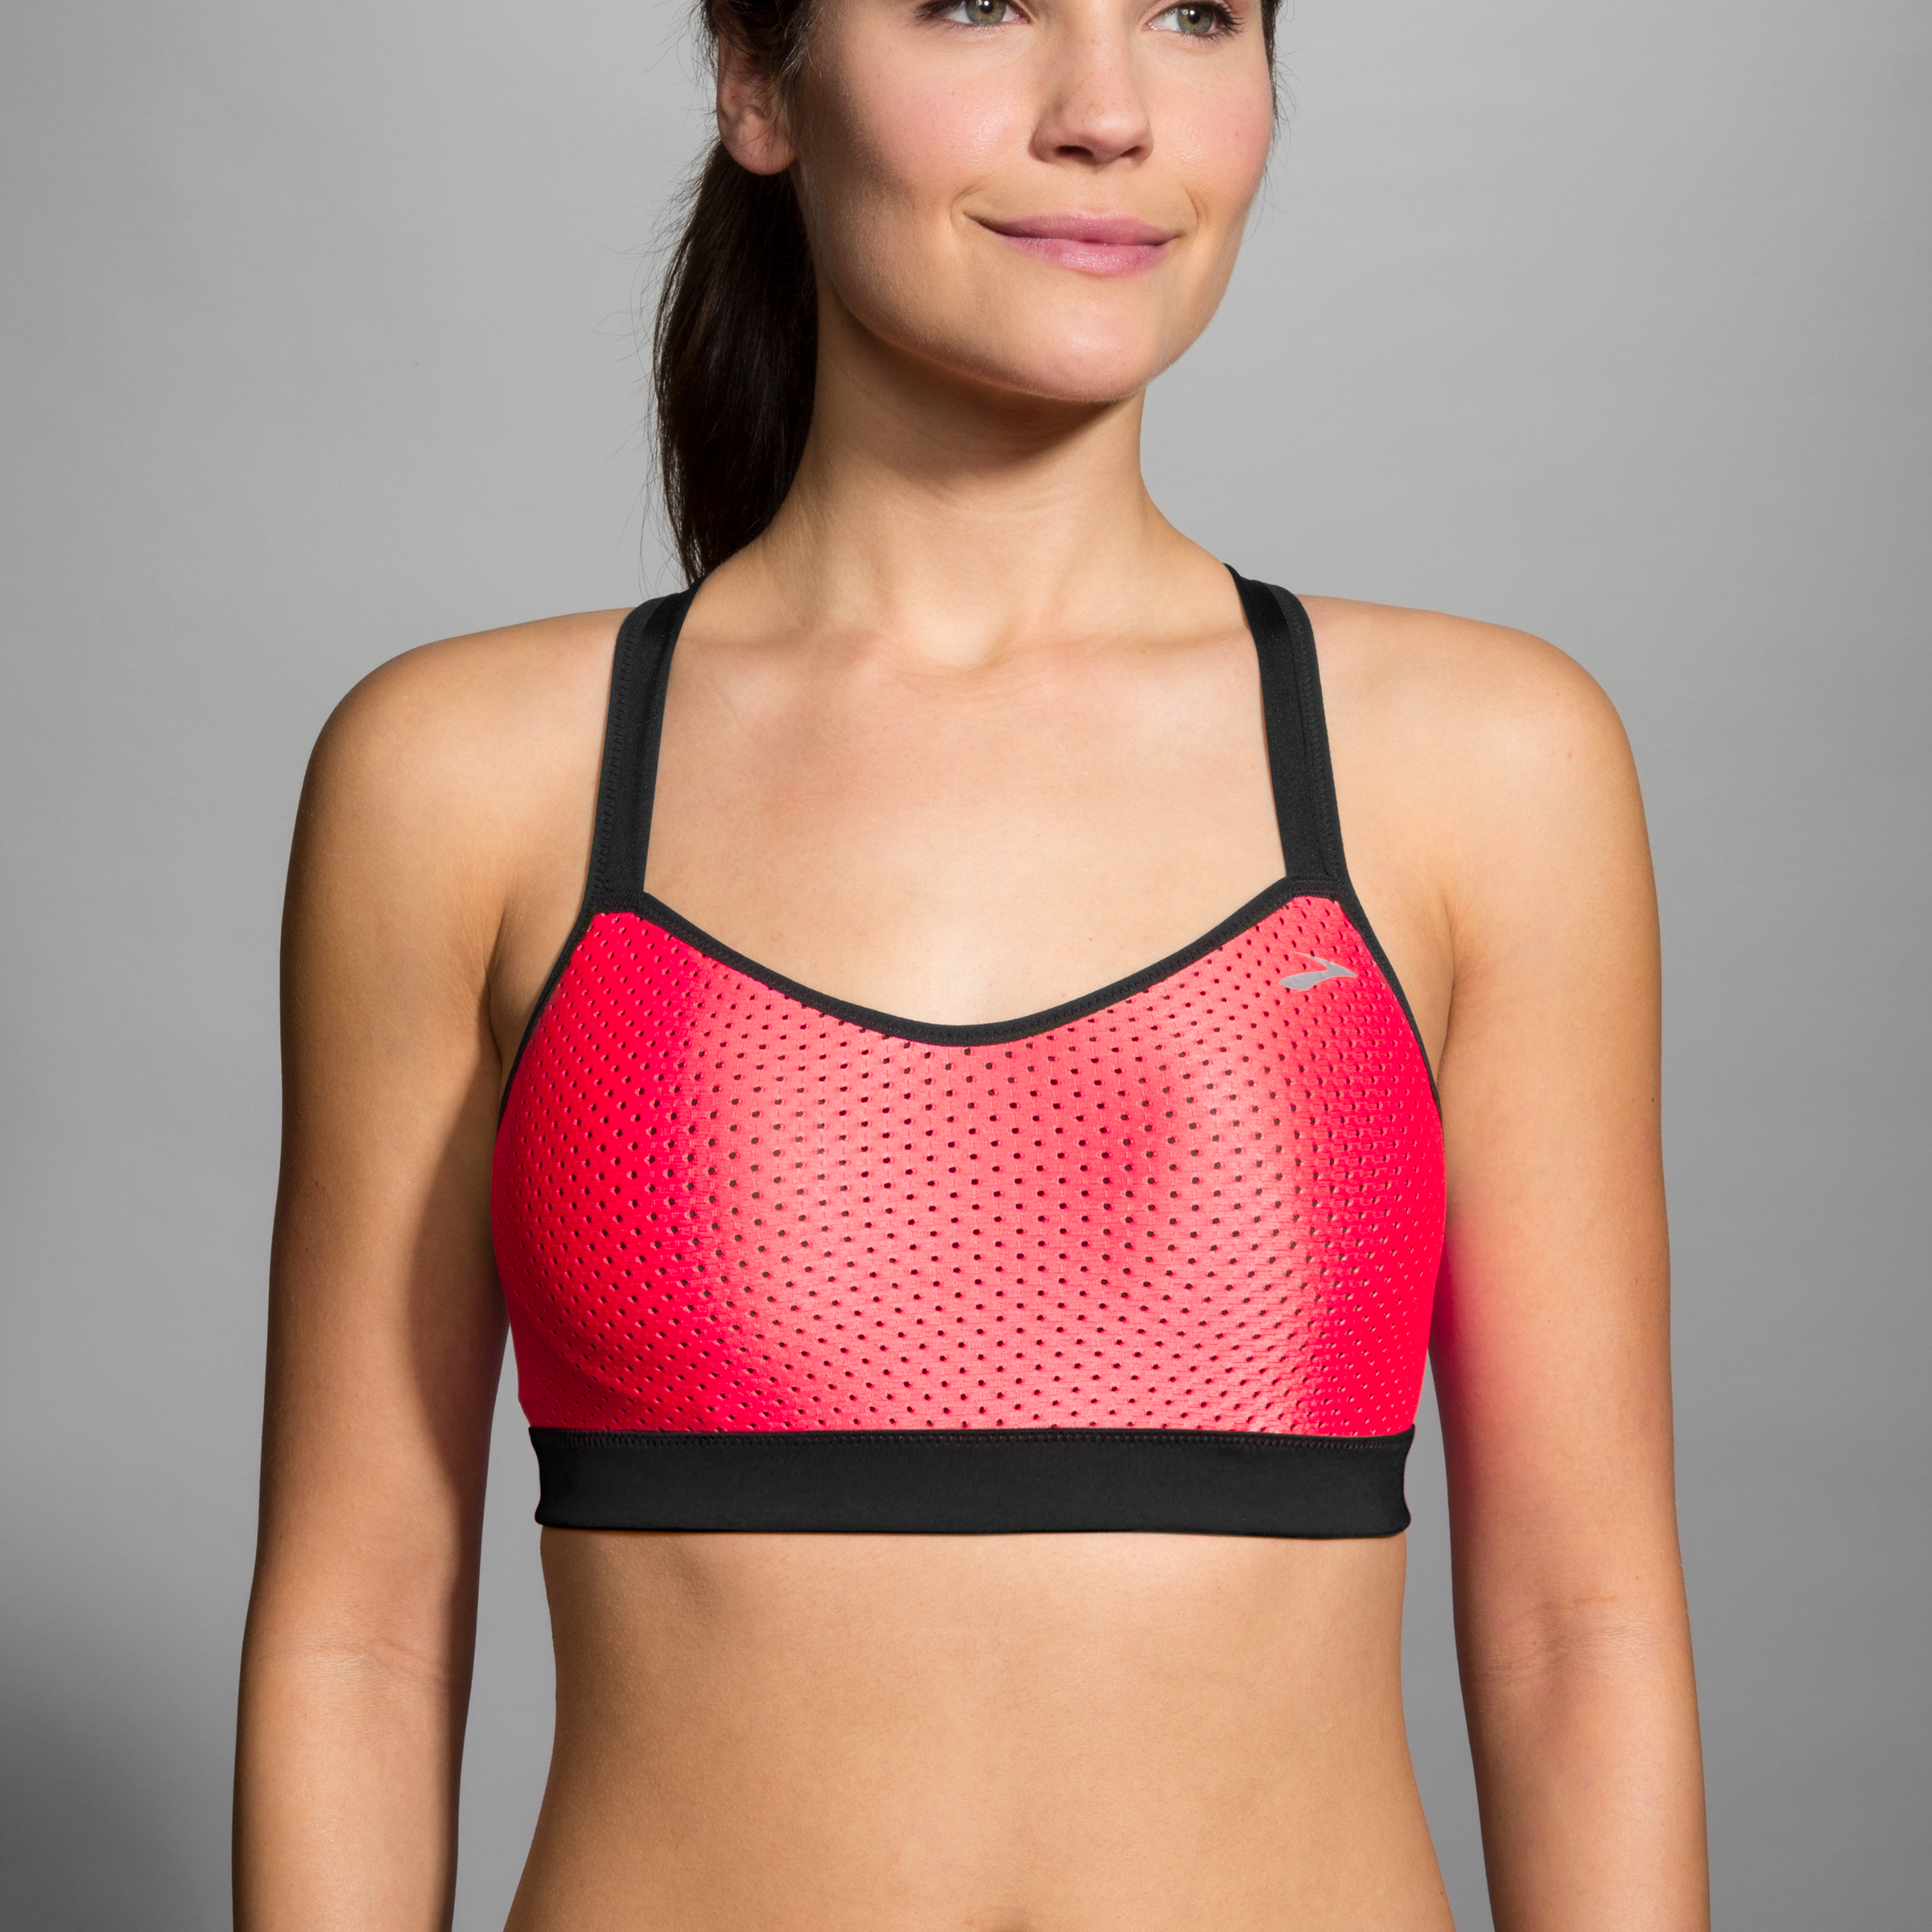 Brooks' Sports Bra Collection Gets an Update Including a New $34